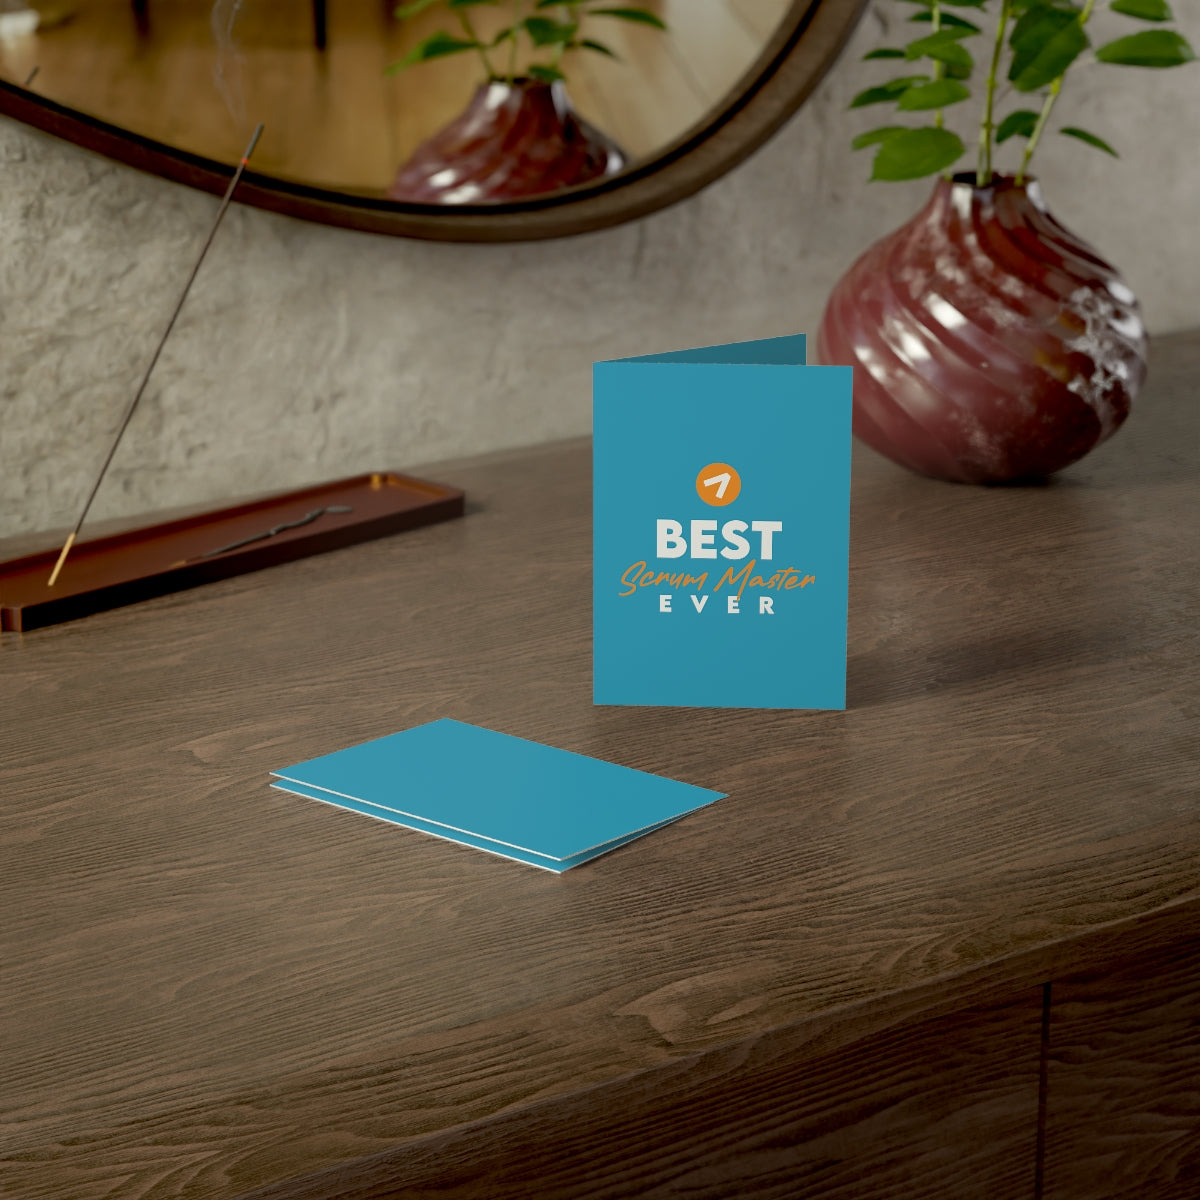 Best Scrum Master ever - Orange Blue - Folded Greeting Cards (1, 10, 30, and 50pcs)